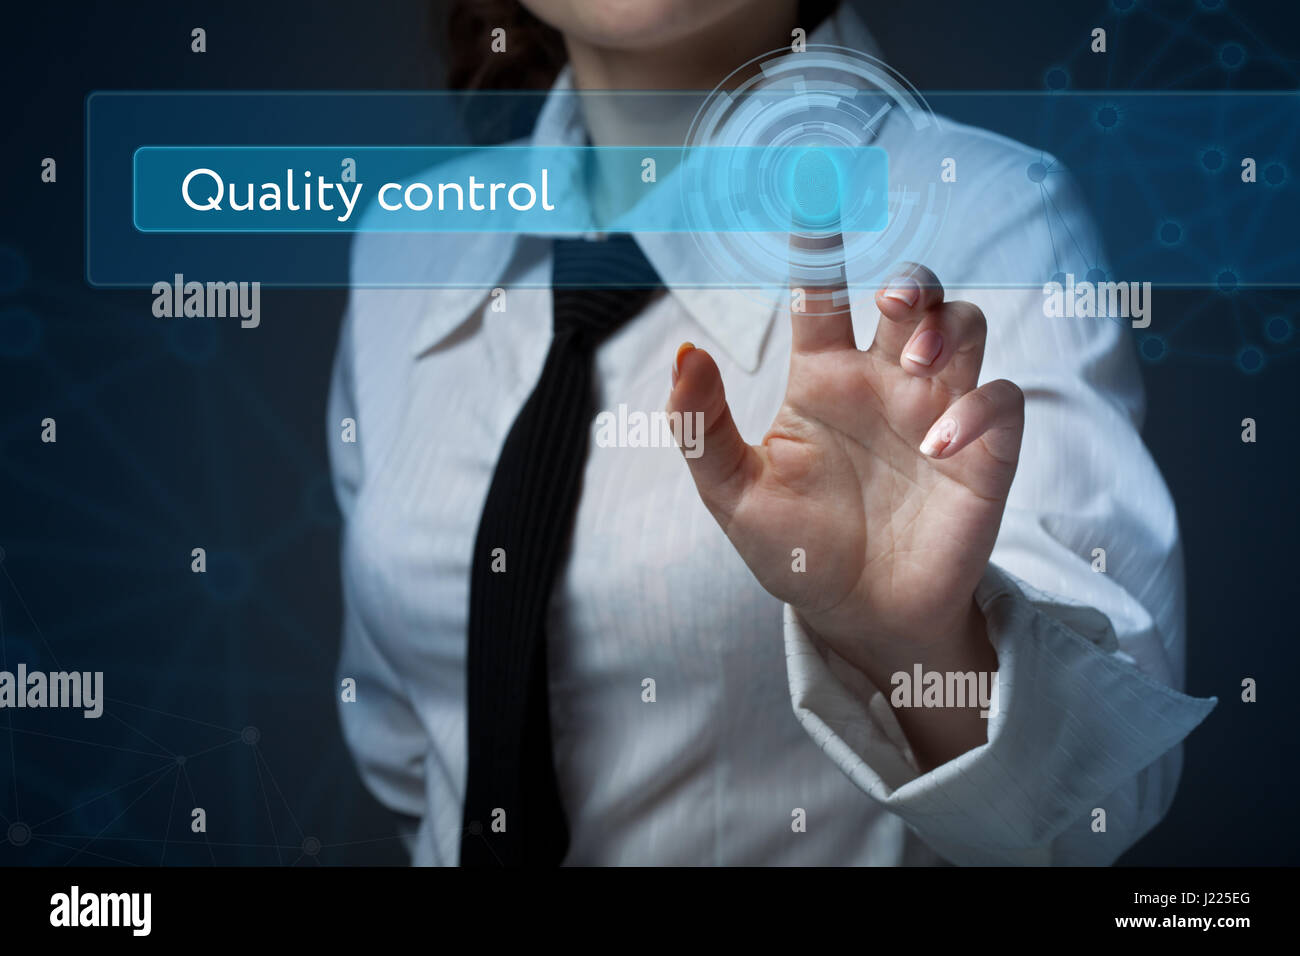 Business, technology, internet and networking concept. Business woman presses a button on the virtual screen: Quality control Stock Photo